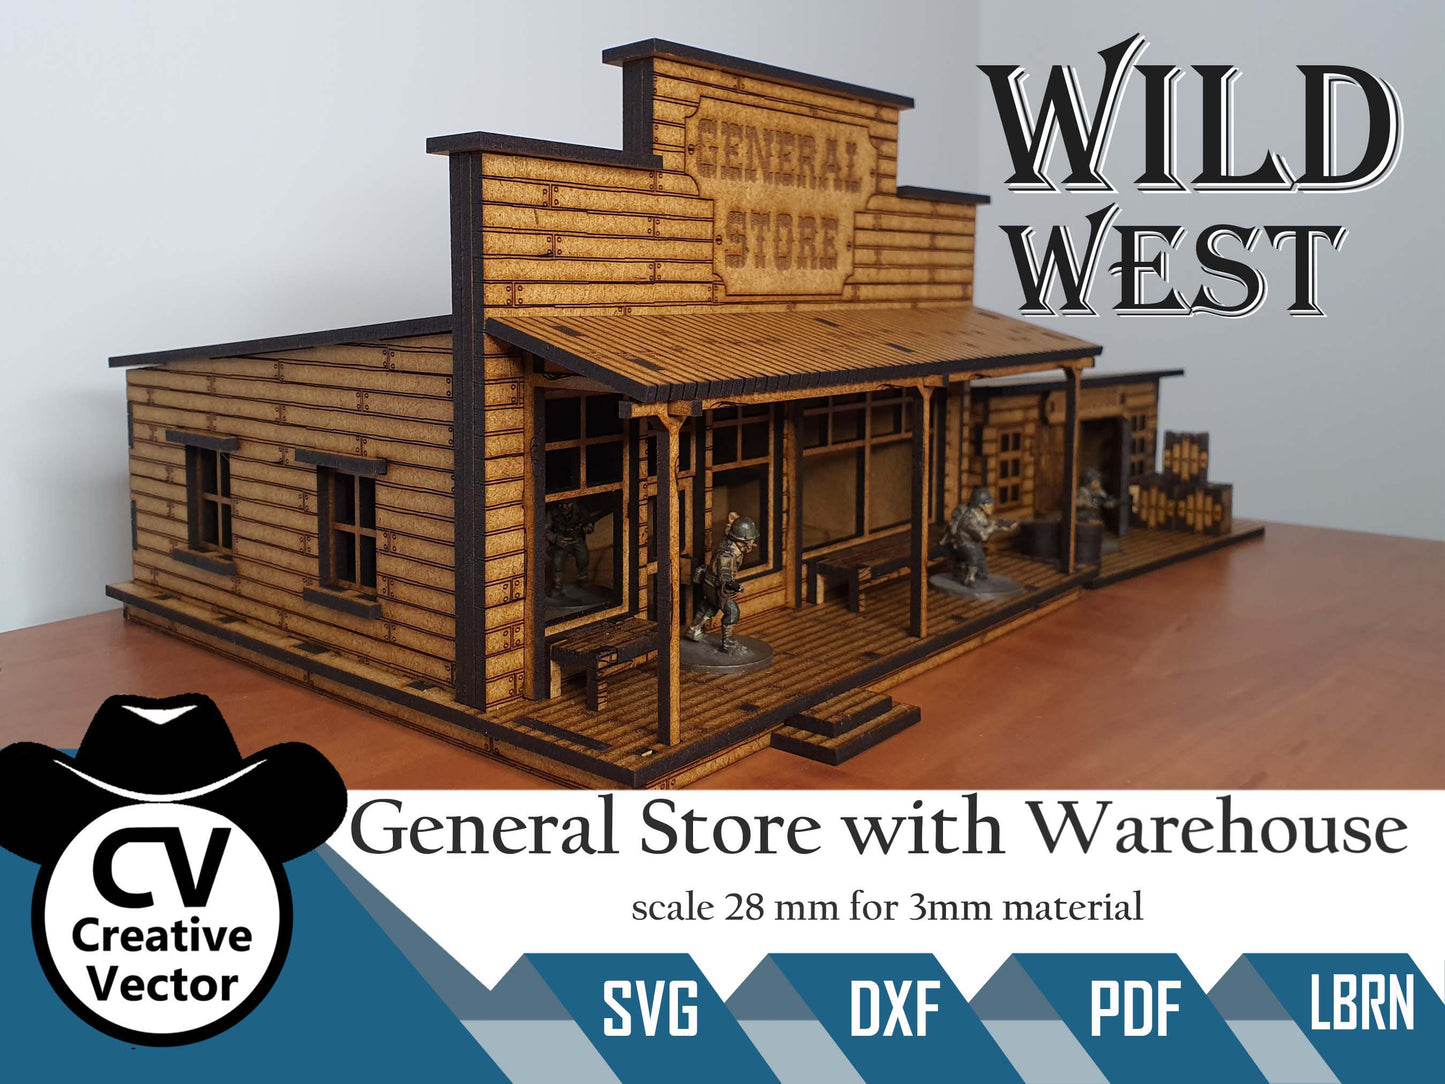 Wild West General Store with Warehouse in scale 28mm for Wargamers